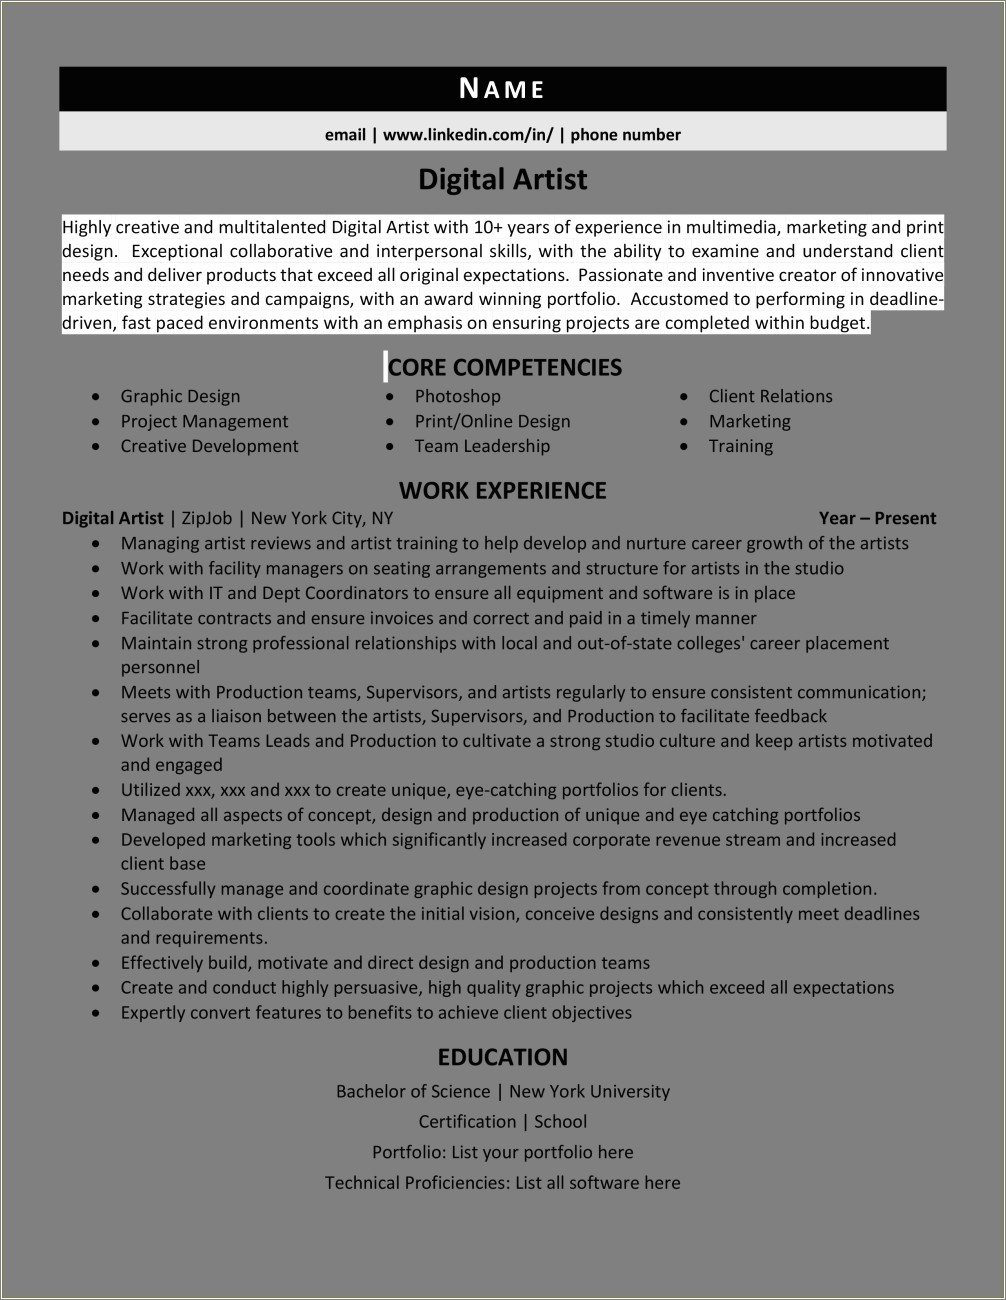 Examples Of Interpersonal Skills In A Resume